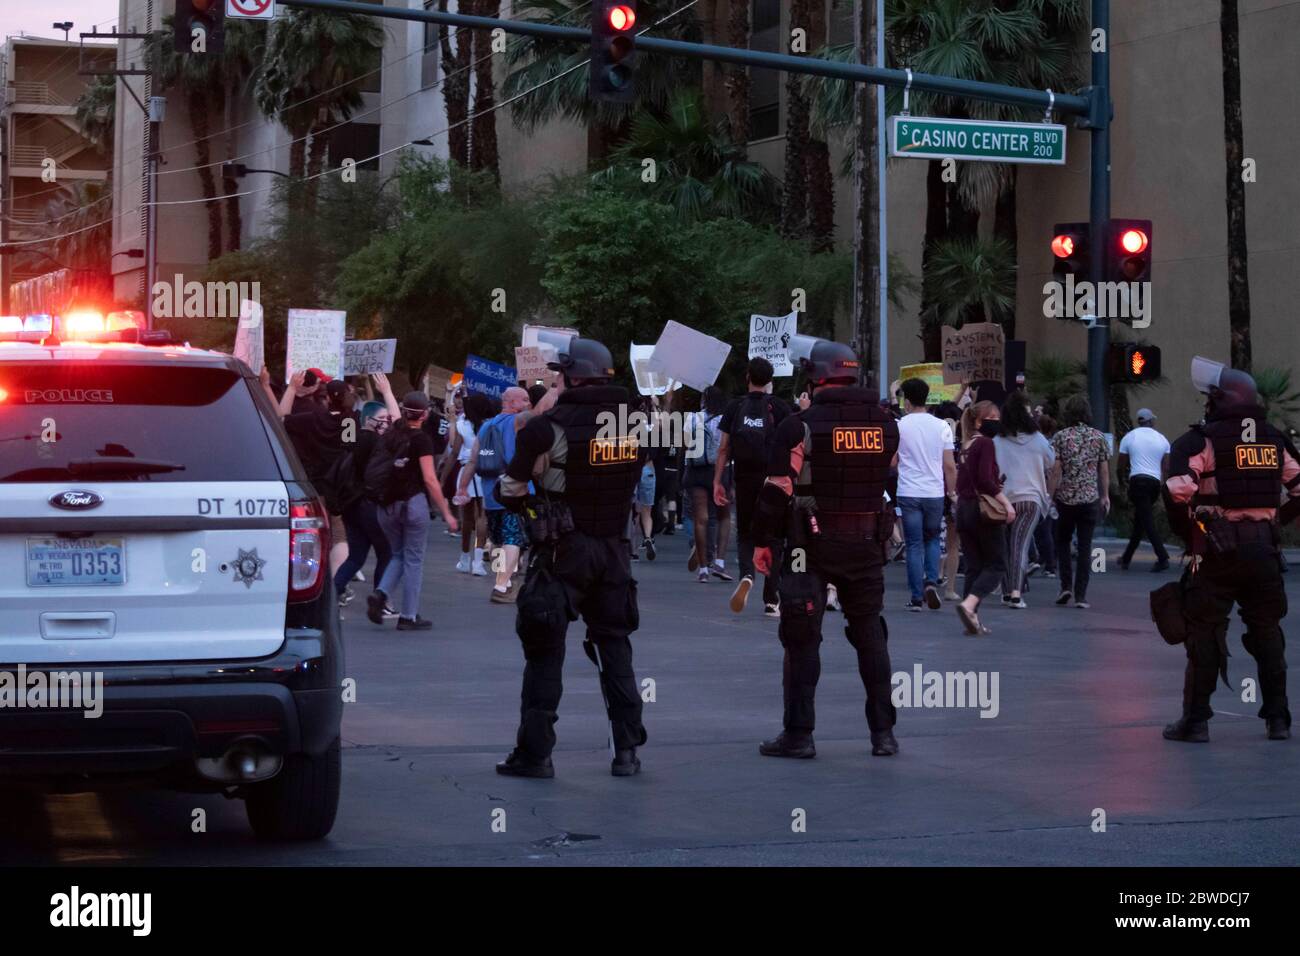 Las Vegas, NV - May 30, 2020: Las Vegas police set up road blocks in the area to keep protesters from the iconic Strip, Fremont Street Experiance and surrounding neighborhoods as protesters gather to protest and march in a nationwide call for changes in the police departments across the country on May 30, 2020 in downtown Las Vegas, Nevada. Credit: Shannon Beelman/The Photo Access Stock Photo